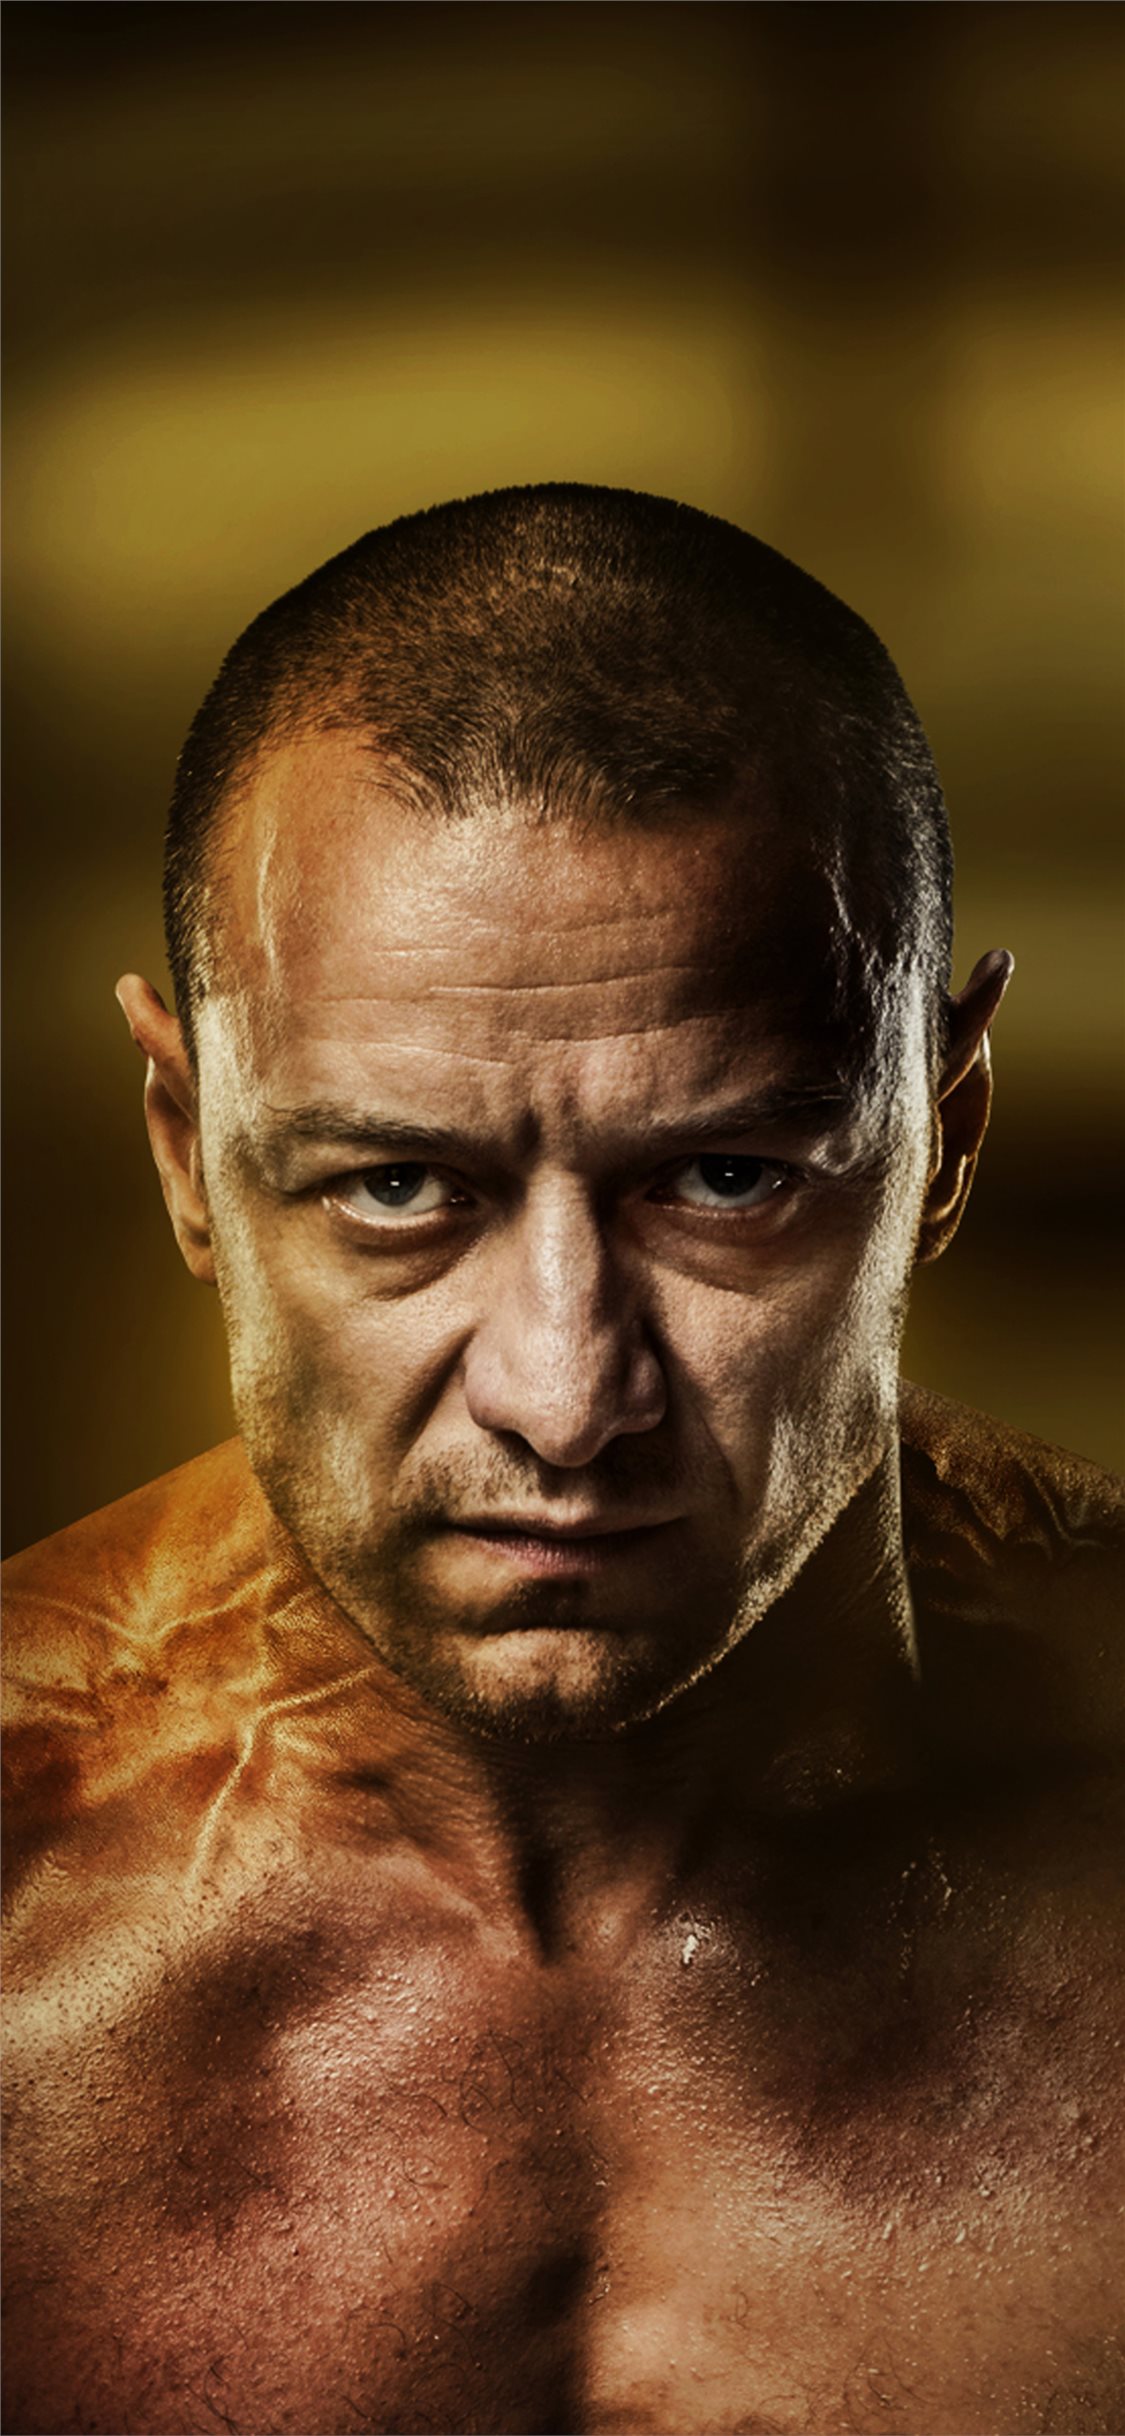 glass movie posters 2019 8k iPhone X Wallpaper Free Download